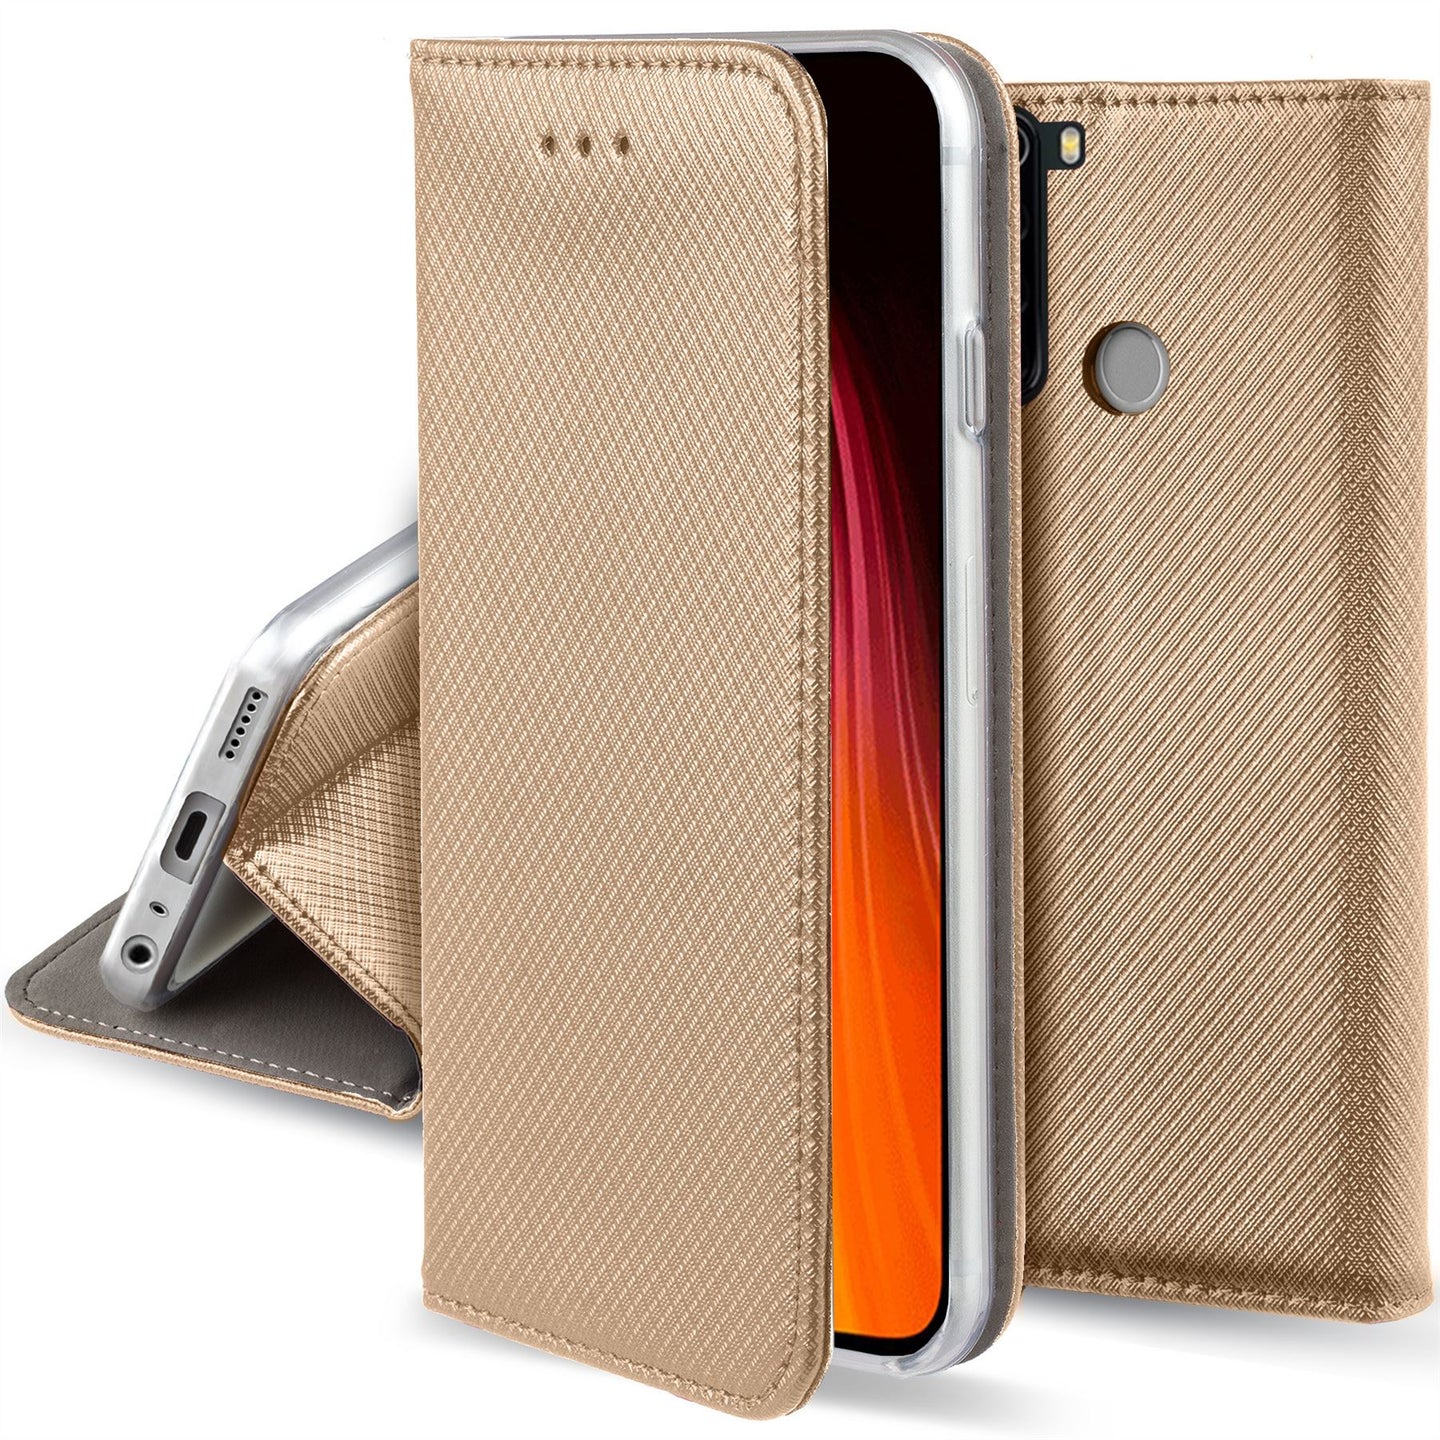 Moozy Case Flip Cover for Xiaomi Redmi Note 8, Gold - Smart Magnetic Flip Case with Card Holder and Stand